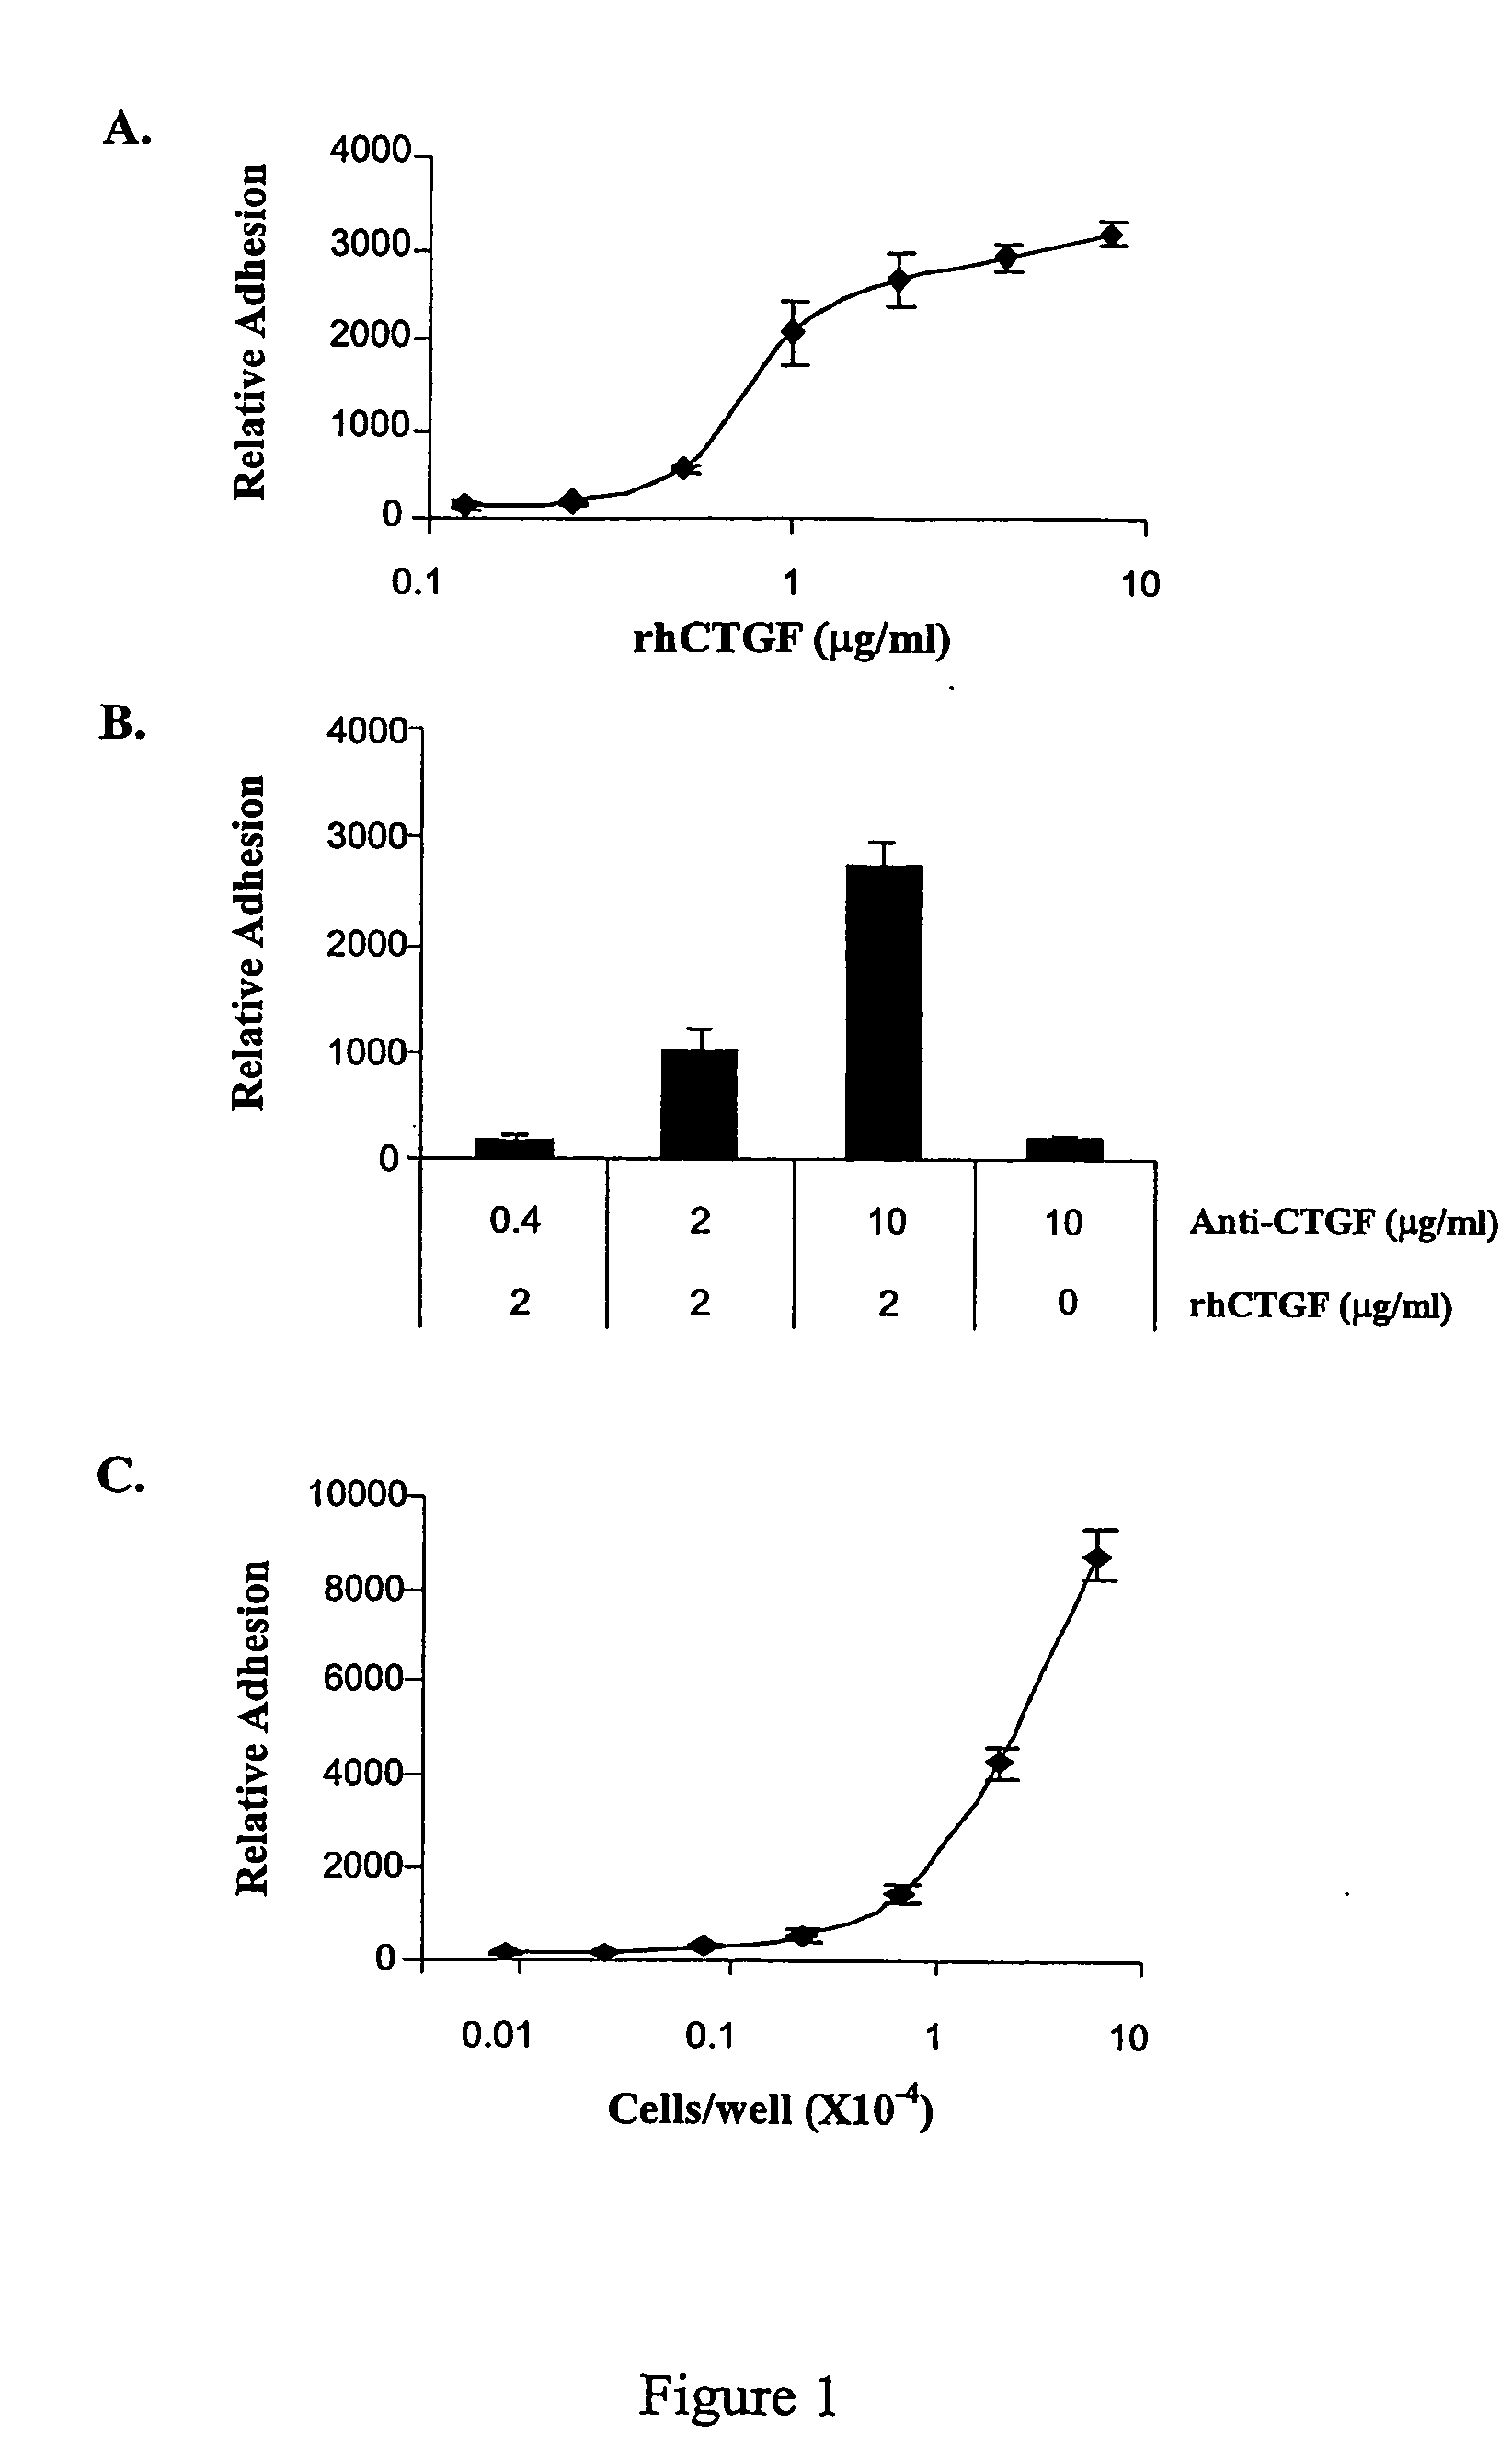 Connective Tissue Growth Factor Signaling